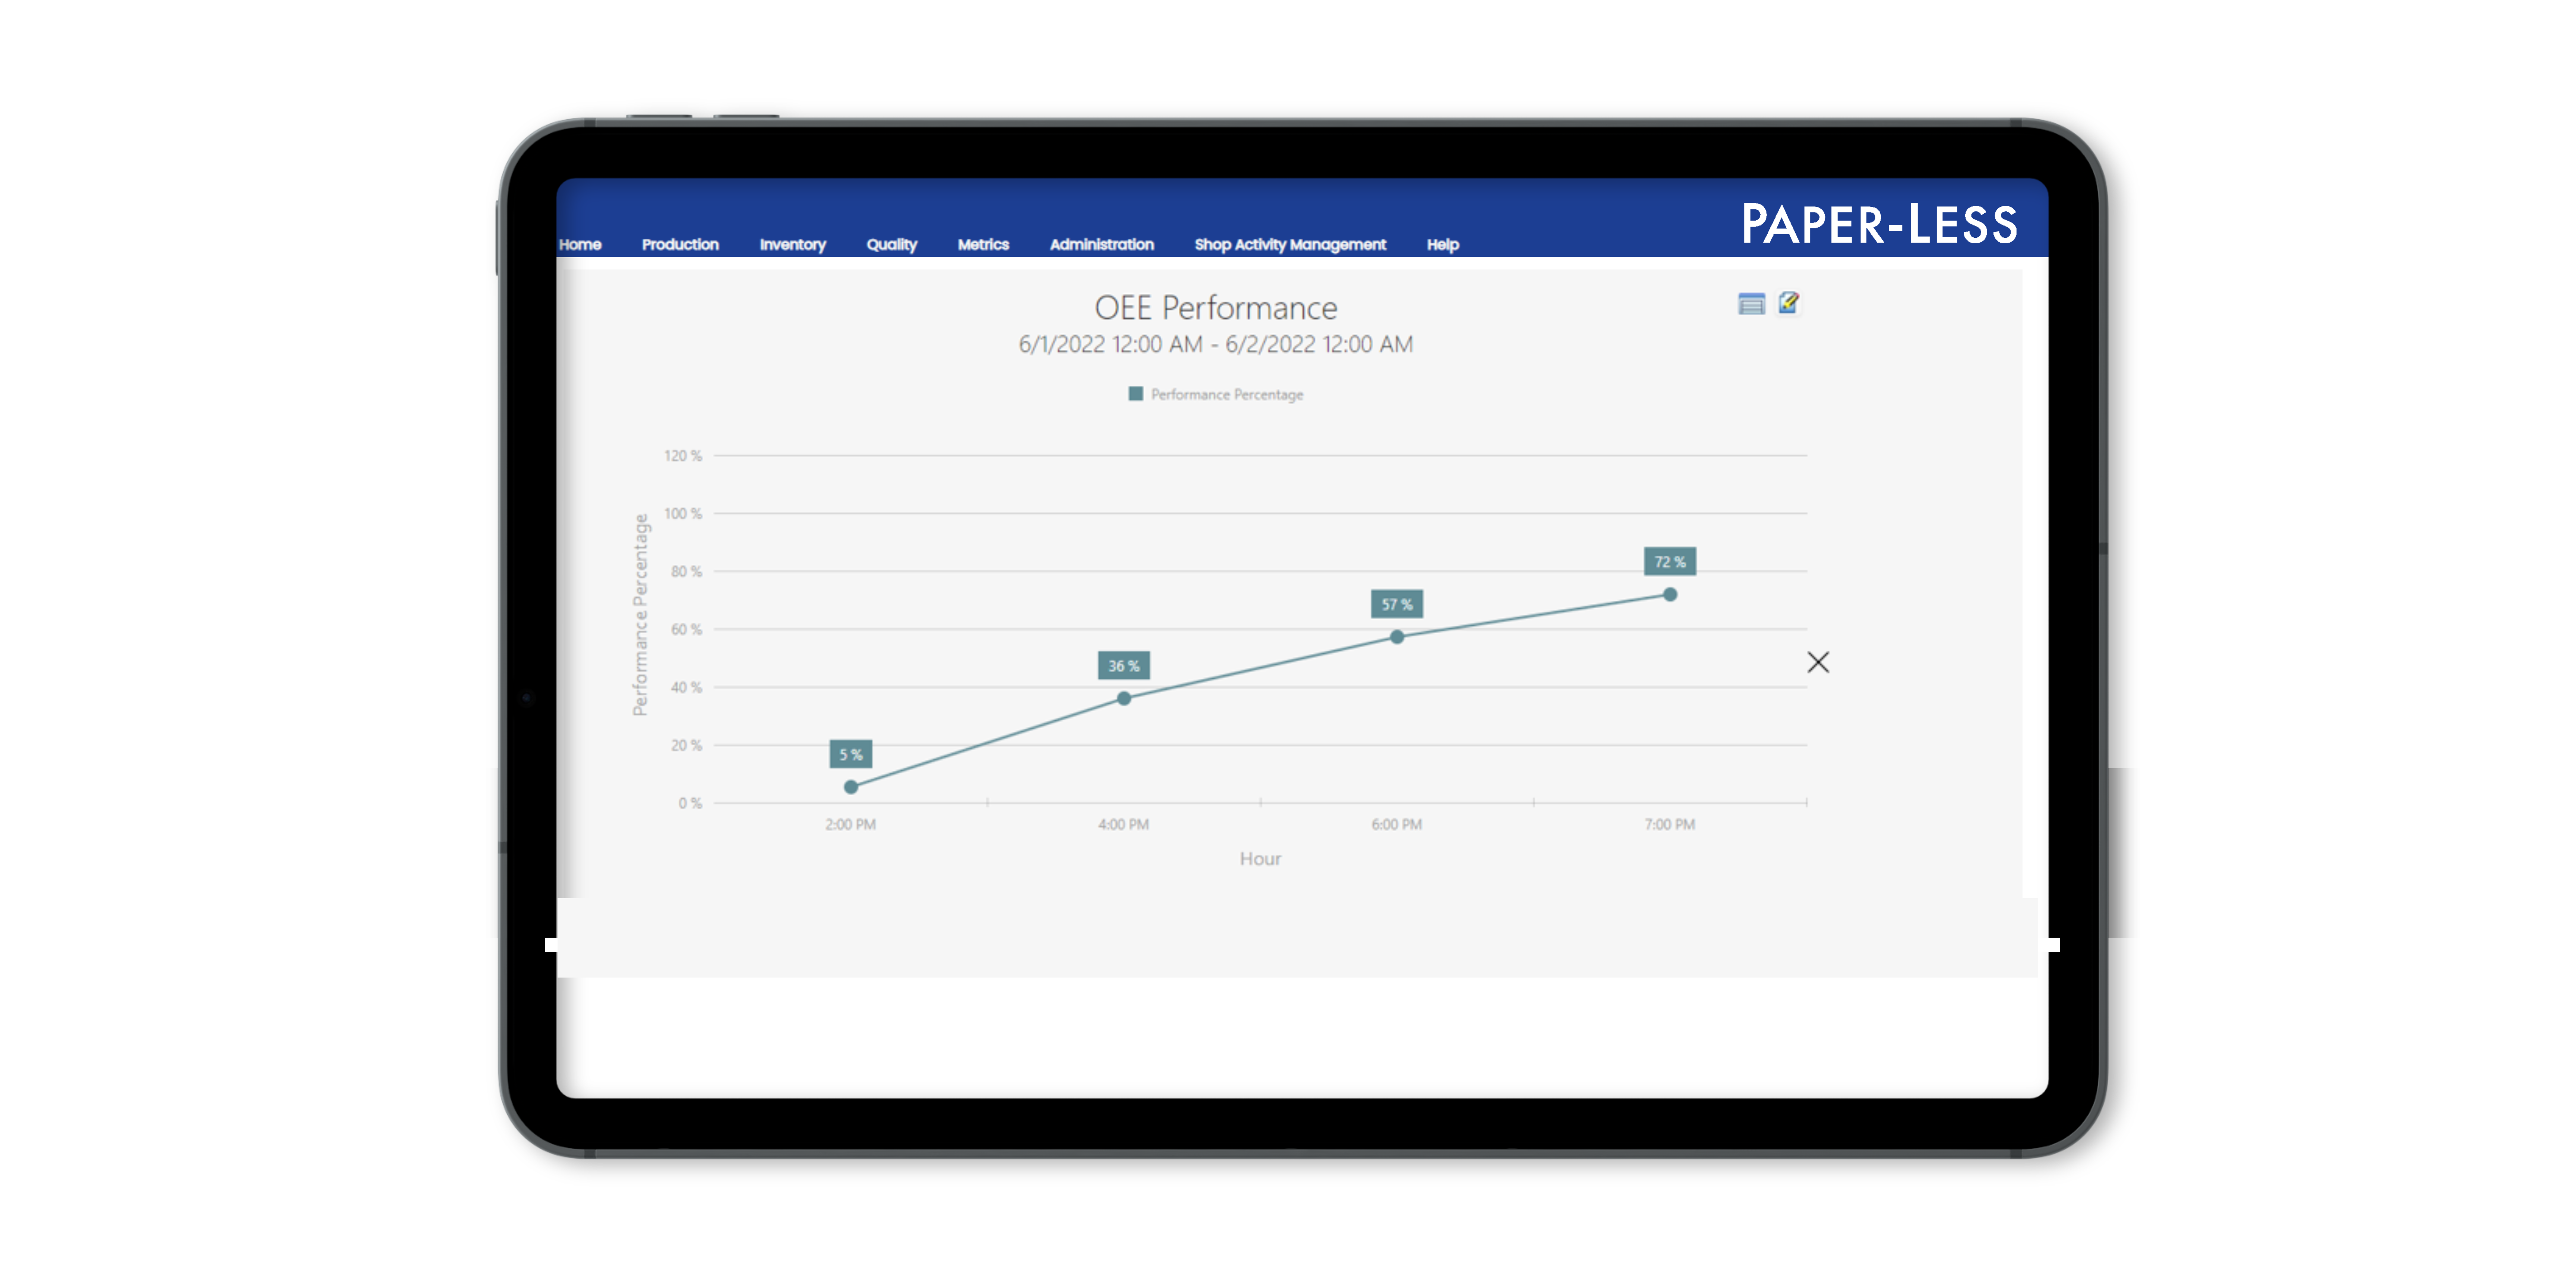 OEE line GRAPH in tablet